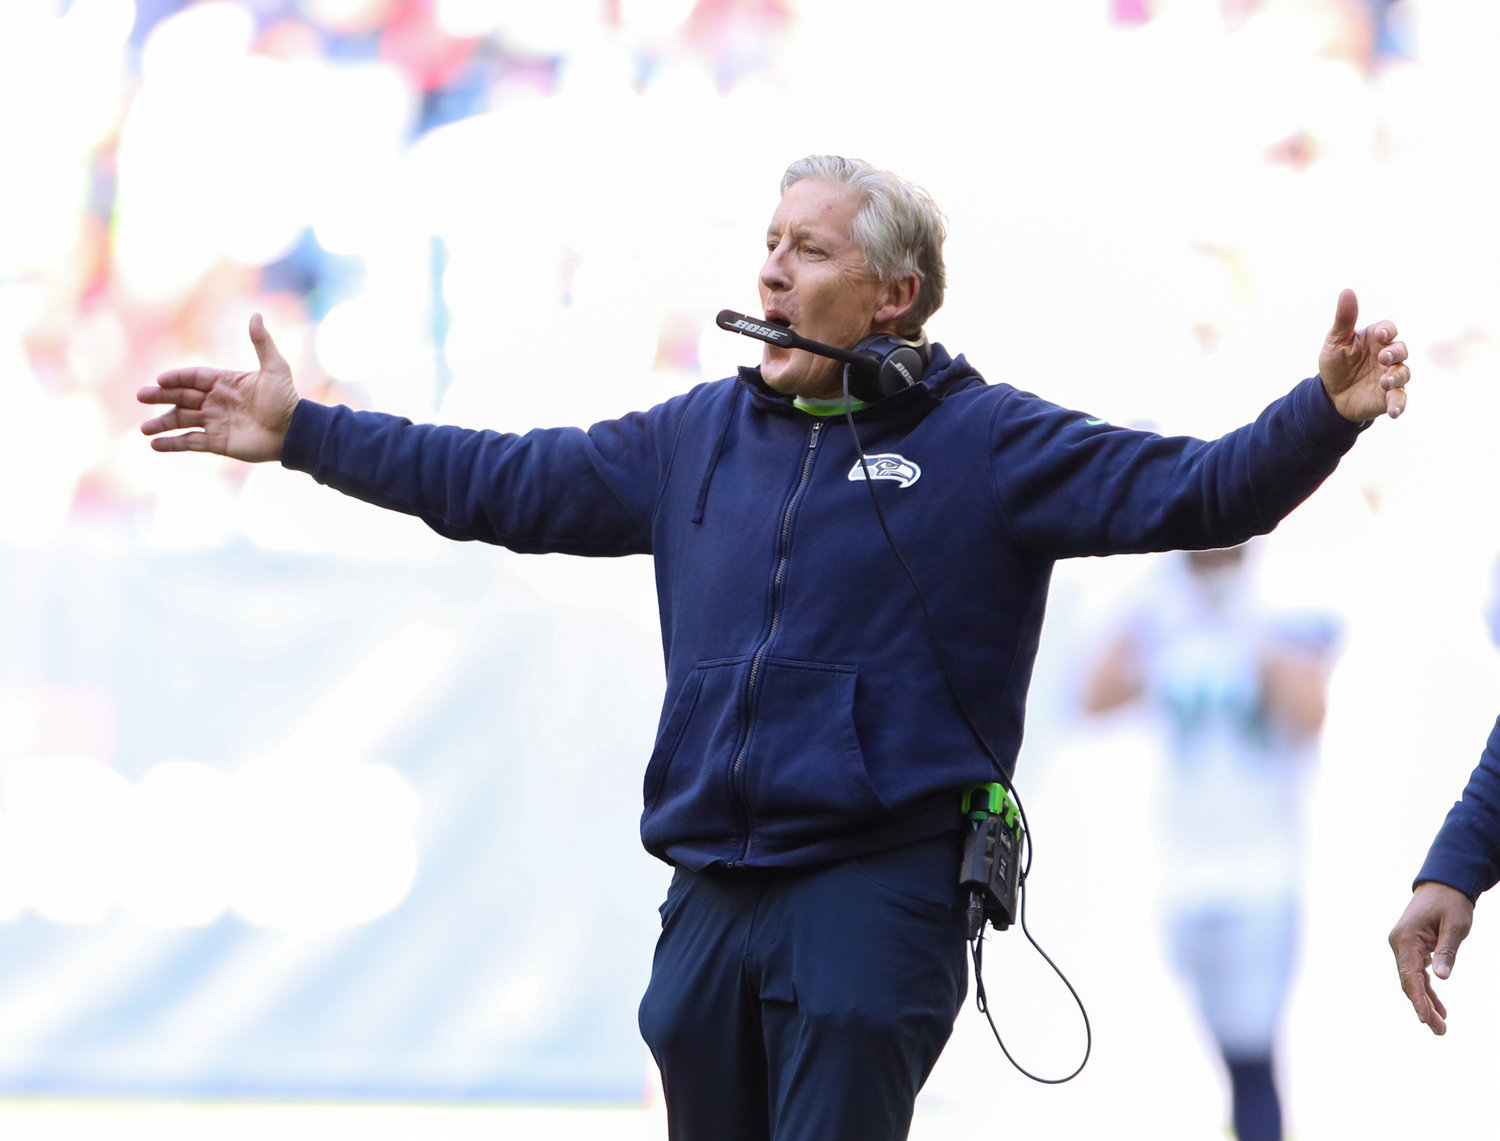 Seattle head coach Pete Carroll reacts after a Seahawks touchdown during the first half of an NFL game between the Seahawks and the Texans on December 12, 2021 in Houston, Texas.